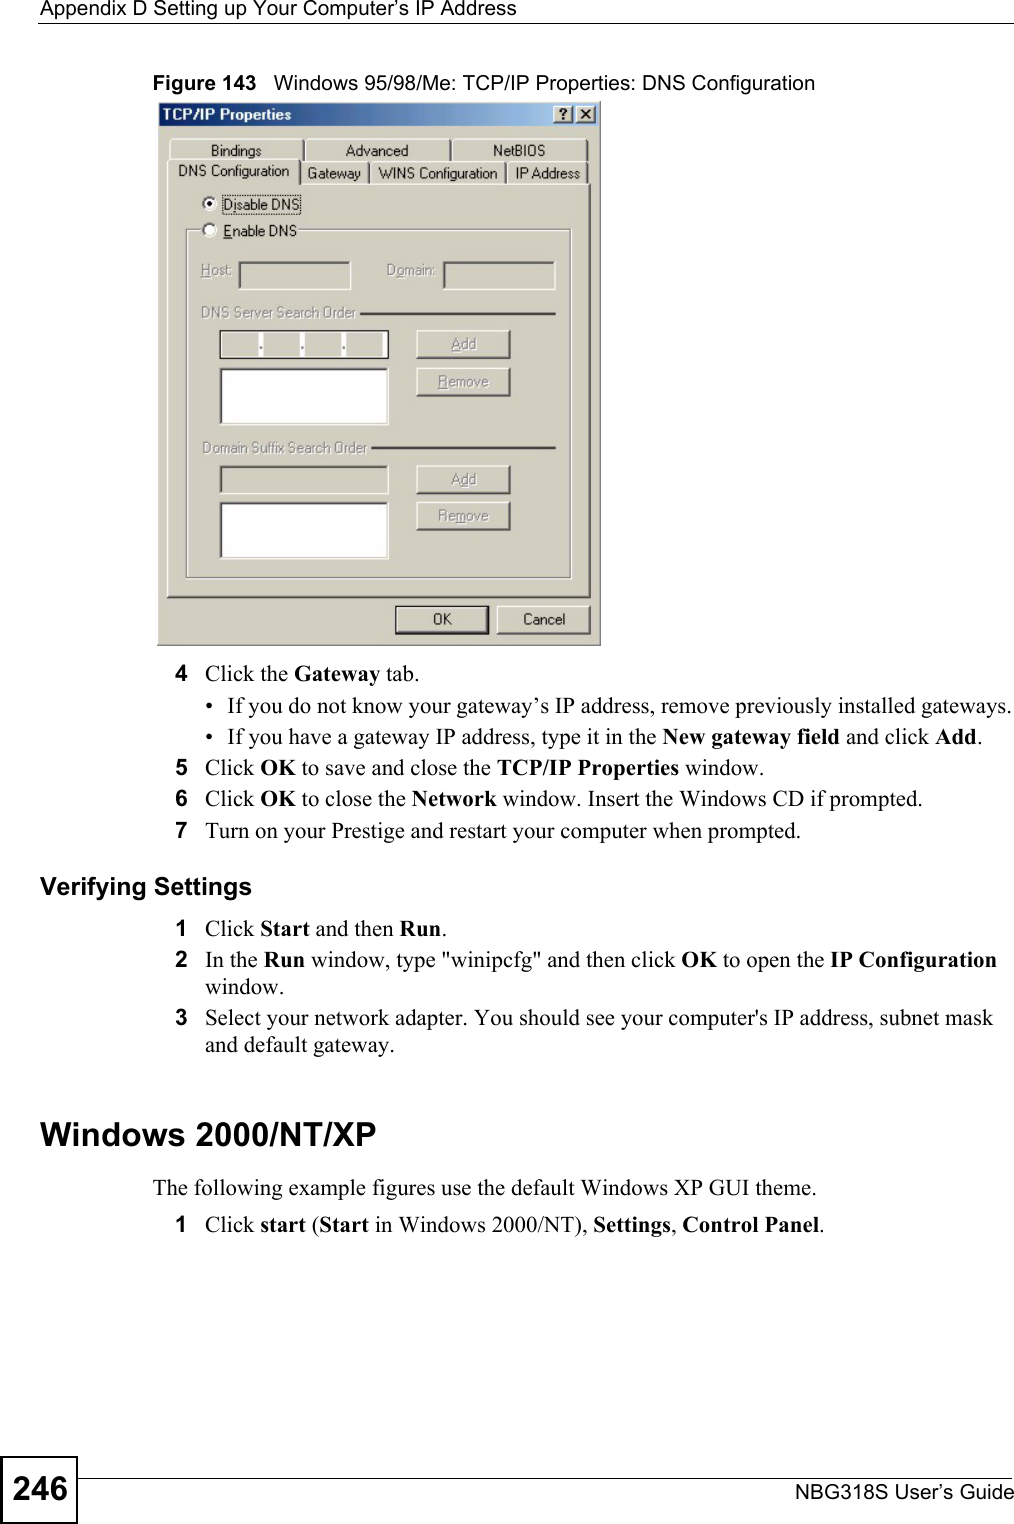 Appendix D Setting up Your Computer’s IP AddressNBG318S User’s Guide246Figure 143   Windows 95/98/Me: TCP/IP Properties: DNS Configuration4Click the Gateway tab.• If you do not know your gateway’s IP address, remove previously installed gateways.• If you have a gateway IP address, type it in the New gateway field and click Add.5Click OK to save and close the TCP/IP Properties window.6Click OK to close the Network window. Insert the Windows CD if prompted.7Turn on your Prestige and restart your computer when prompted.Verifying Settings1Click Start and then Run.2In the Run window, type &quot;winipcfg&quot; and then click OK to open the IP Configuration window.3Select your network adapter. You should see your computer&apos;s IP address, subnet mask and default gateway.Windows 2000/NT/XPThe following example figures use the default Windows XP GUI theme.1Click start (Start in Windows 2000/NT), Settings, Control Panel.